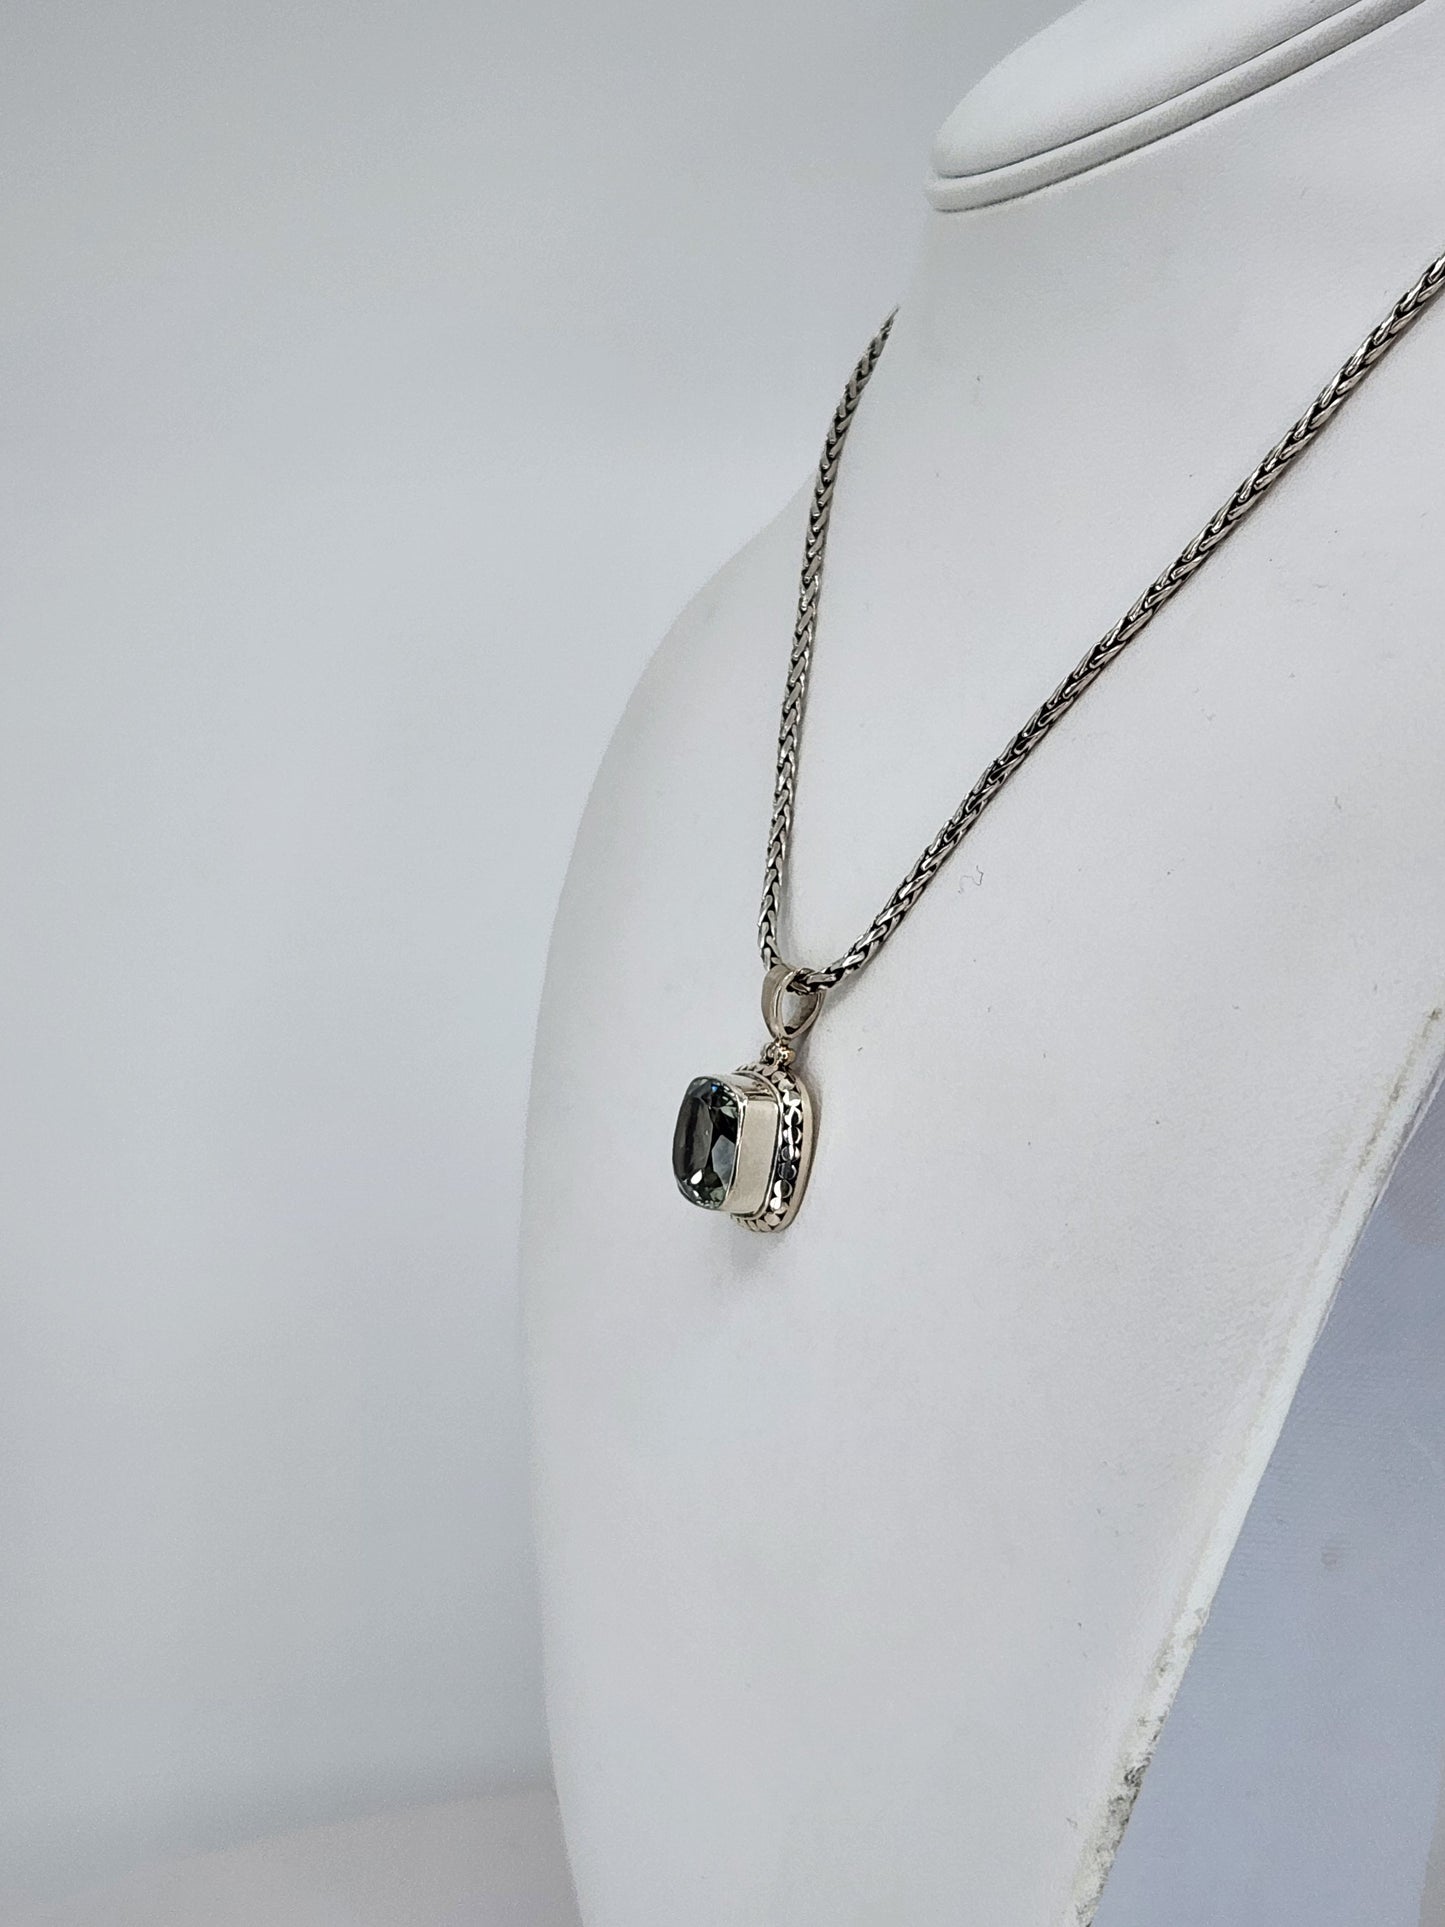 Janice Carson - Green Amethyst Small Cushion Cut Pendant With Sterling Silver Necklace